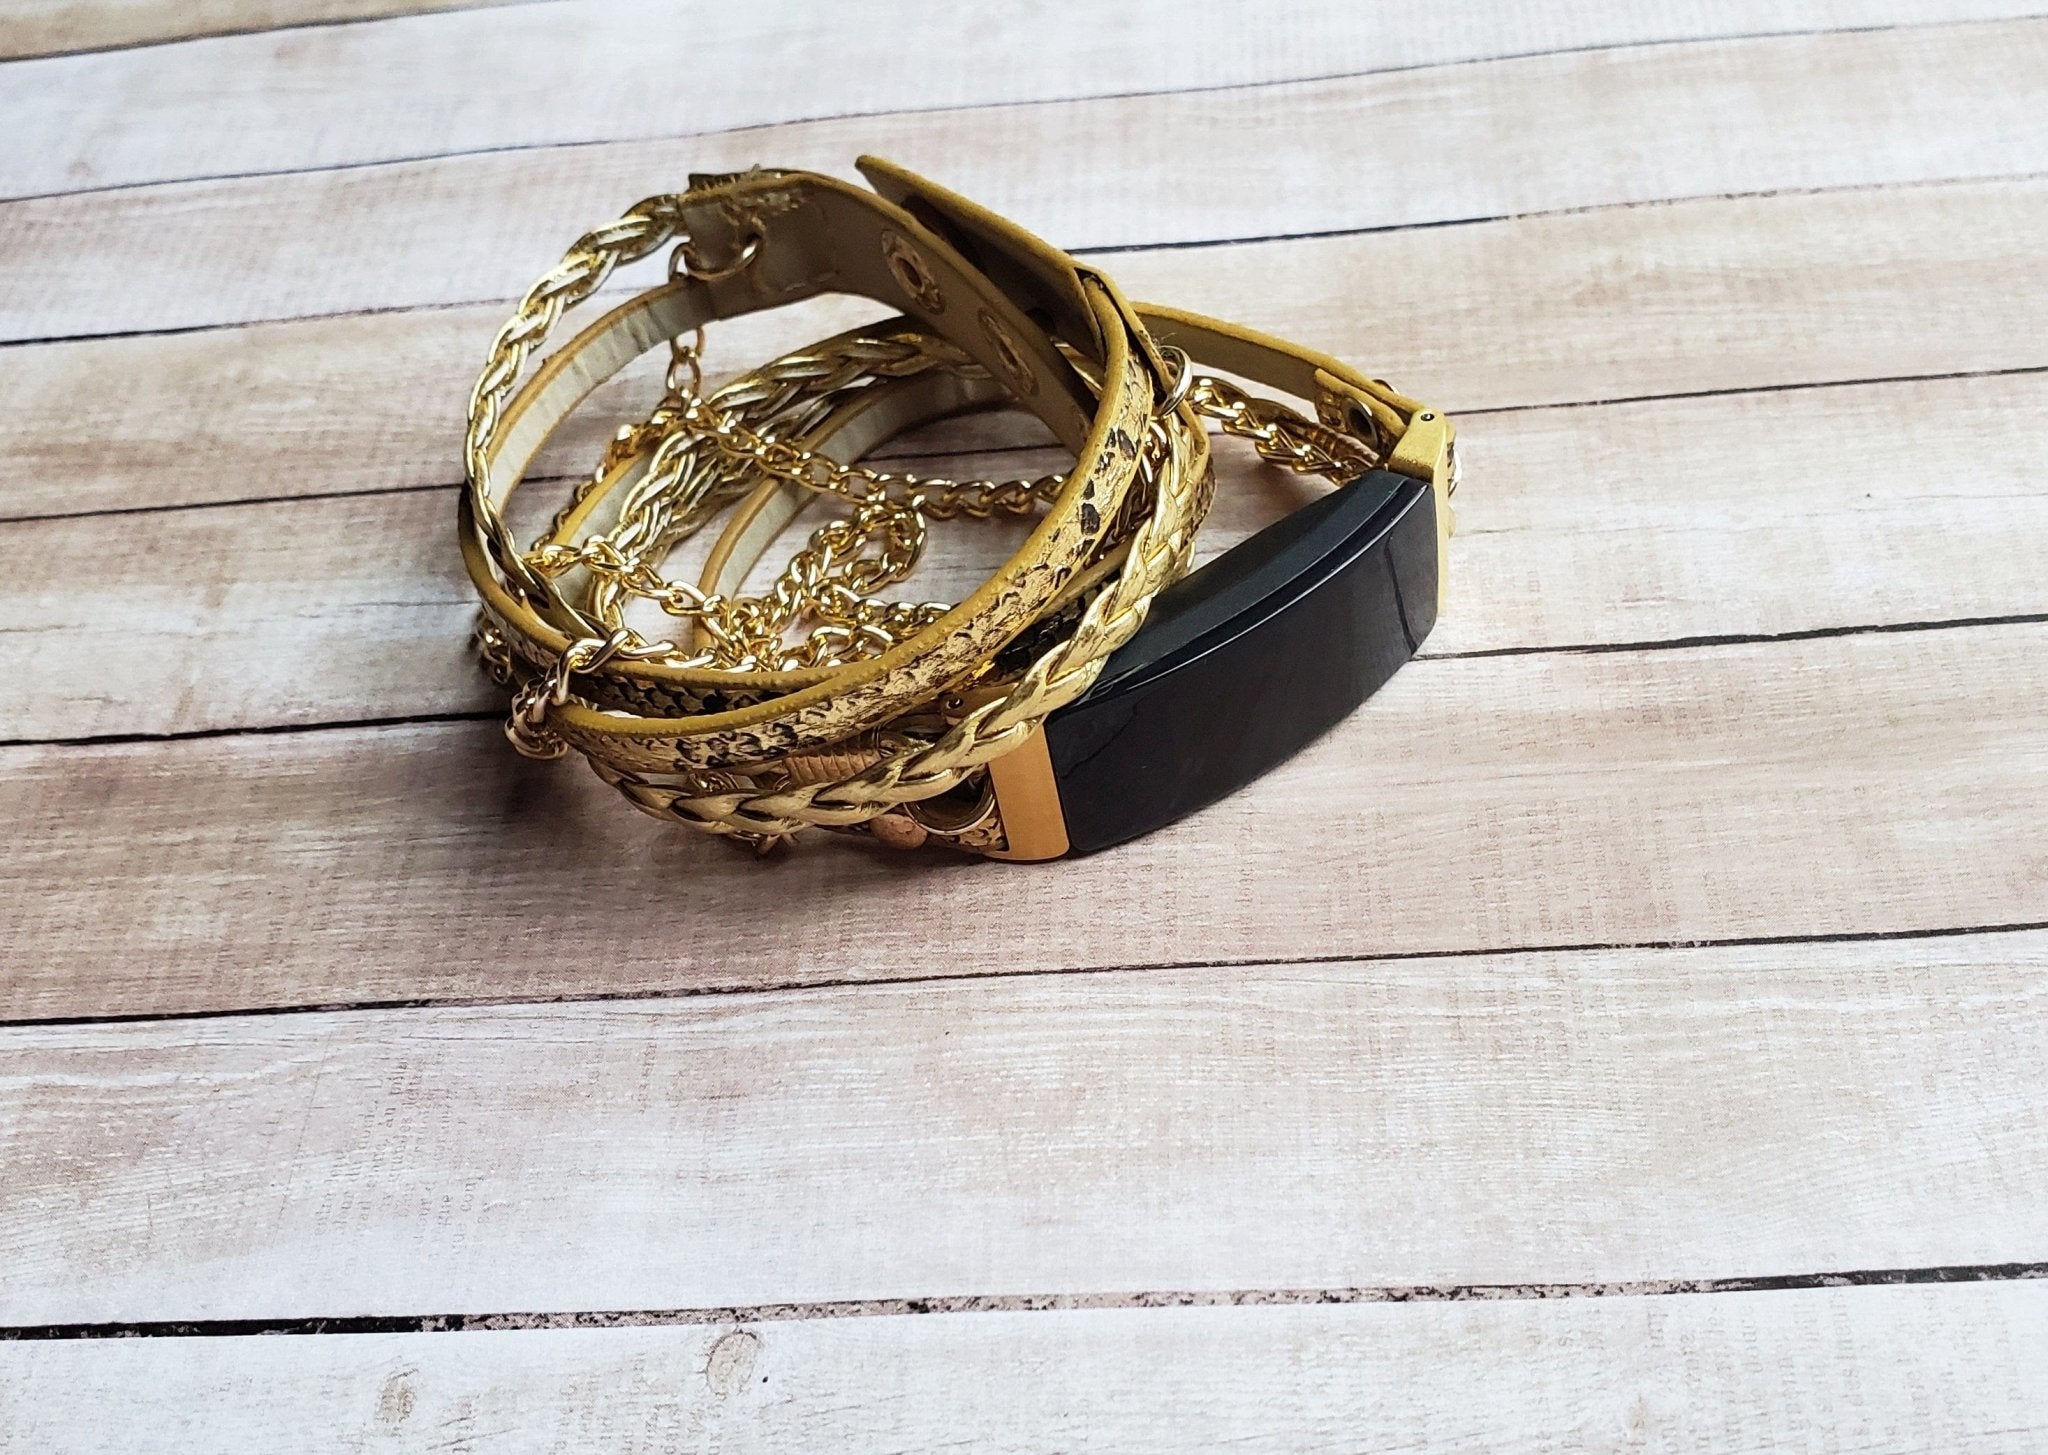 Boho Chic Fitbit LUXE Band Vegan Leather Braided Fancy Fitbit Luxe Strap  Bohemian Hippie Bracelet for Fitbit Luxe Best Gift 